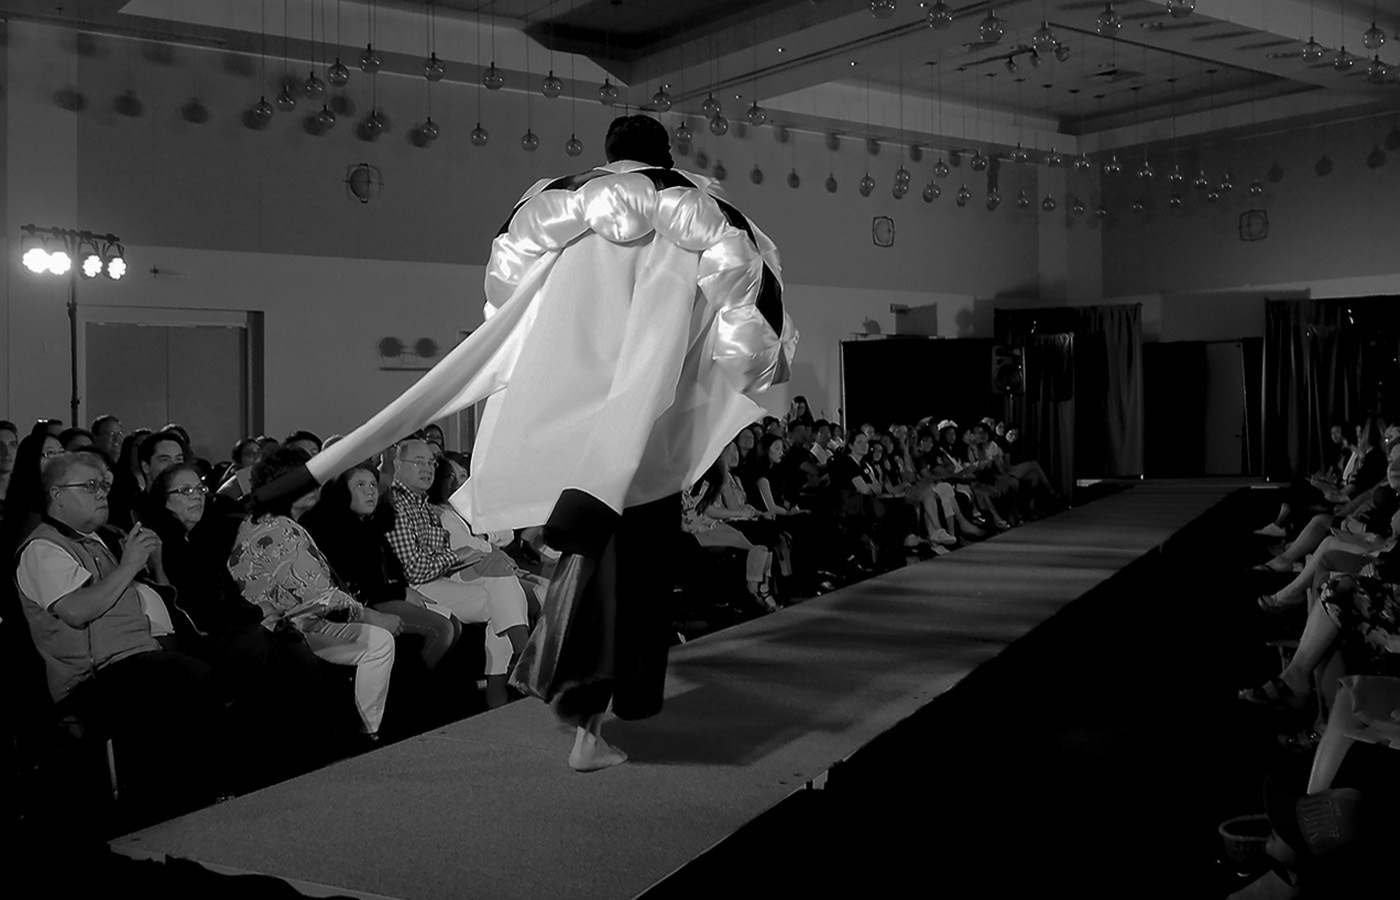 A black and white image of a figure walking along a long fashion runway with an audience of people on either side of it. The model wears a white coat with a large stuffed boa-shaped neckpiece with a diamond motif.